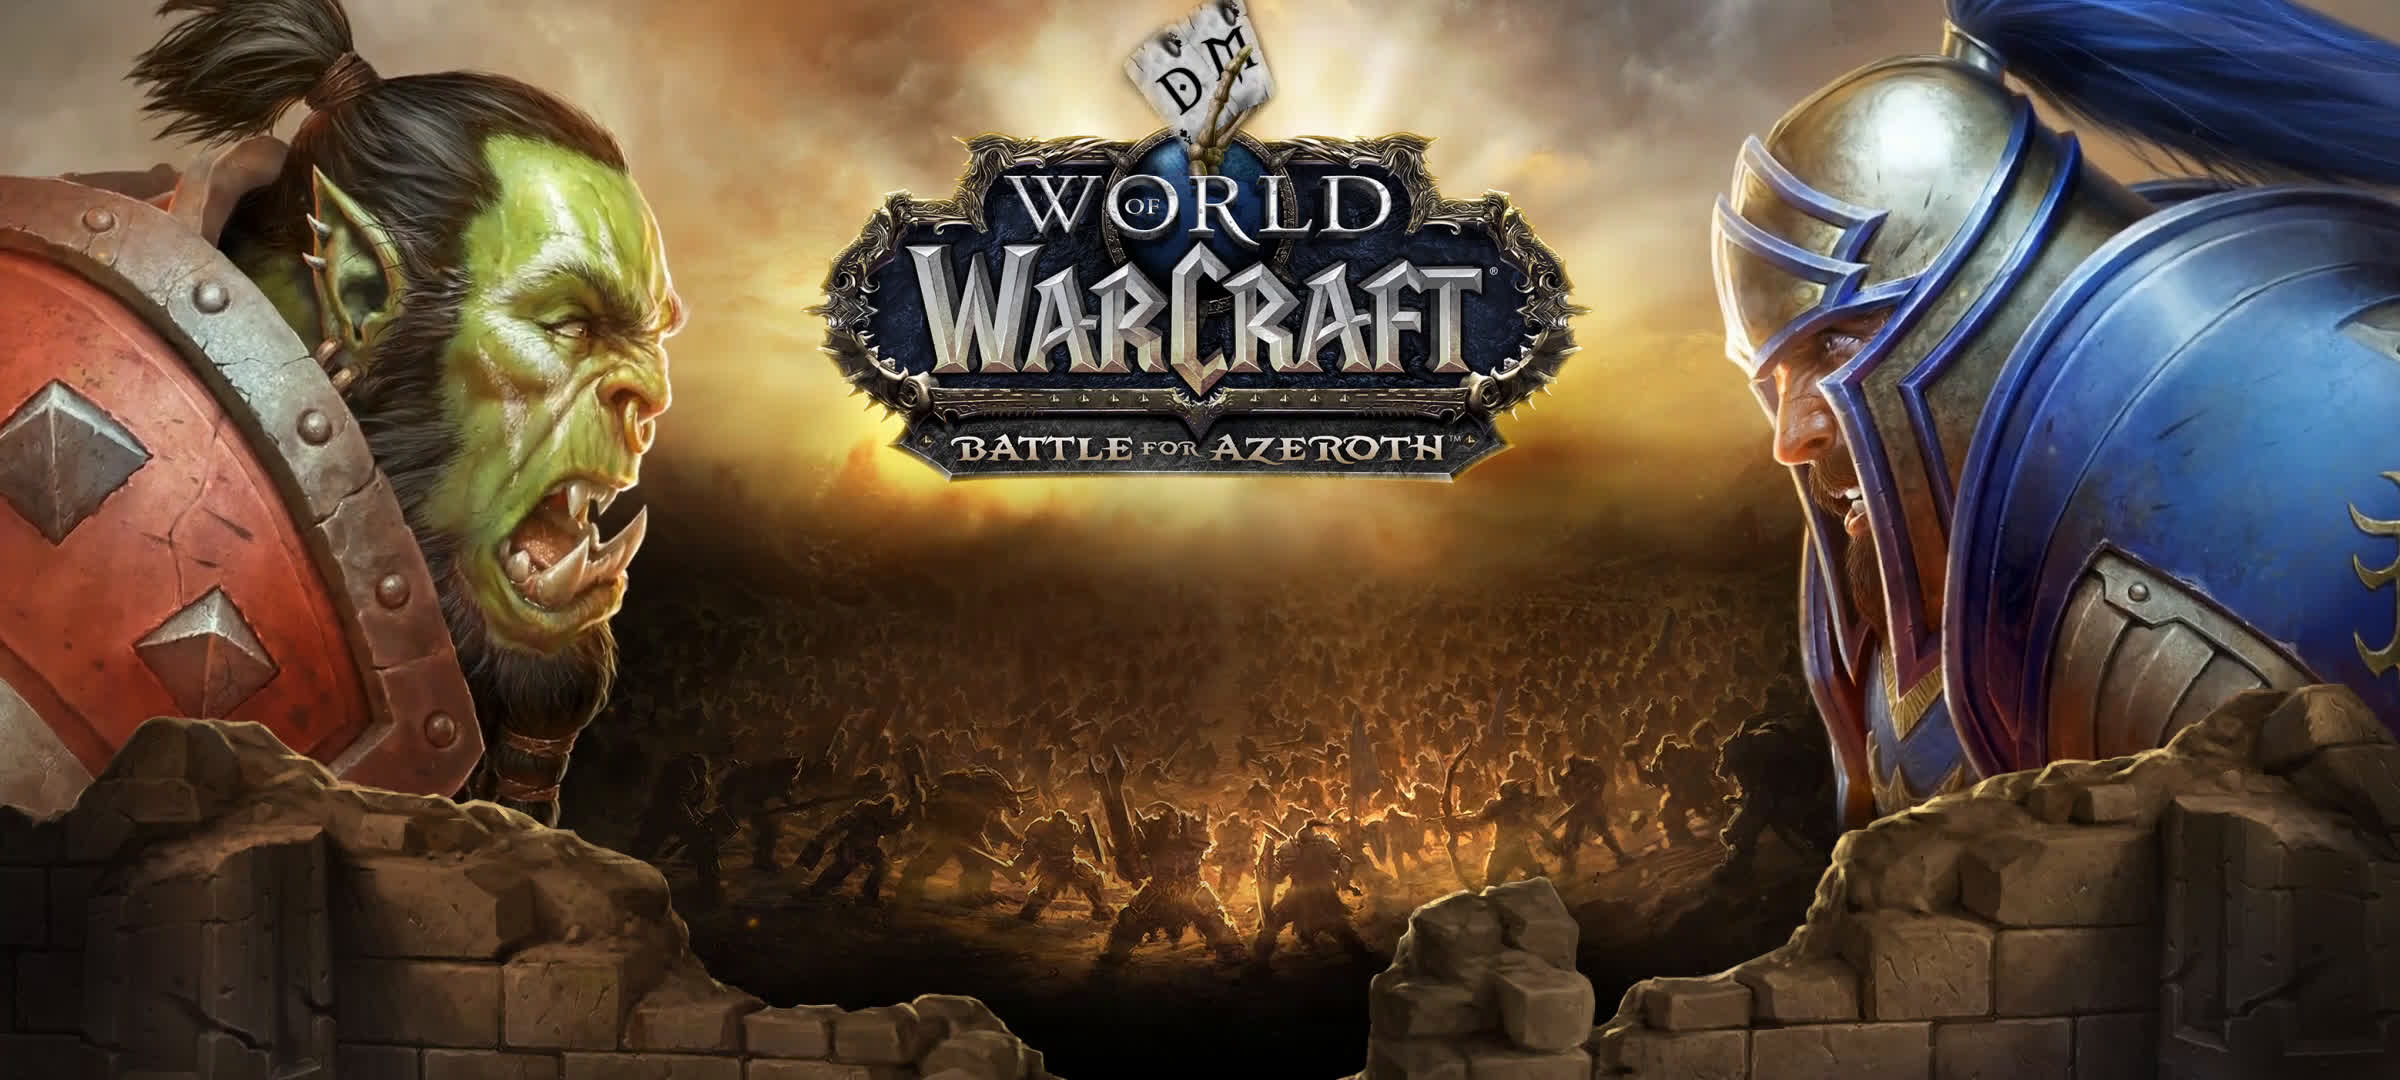 World Of Warcraft Battle For Azeroth Wallpapers Wallpaper